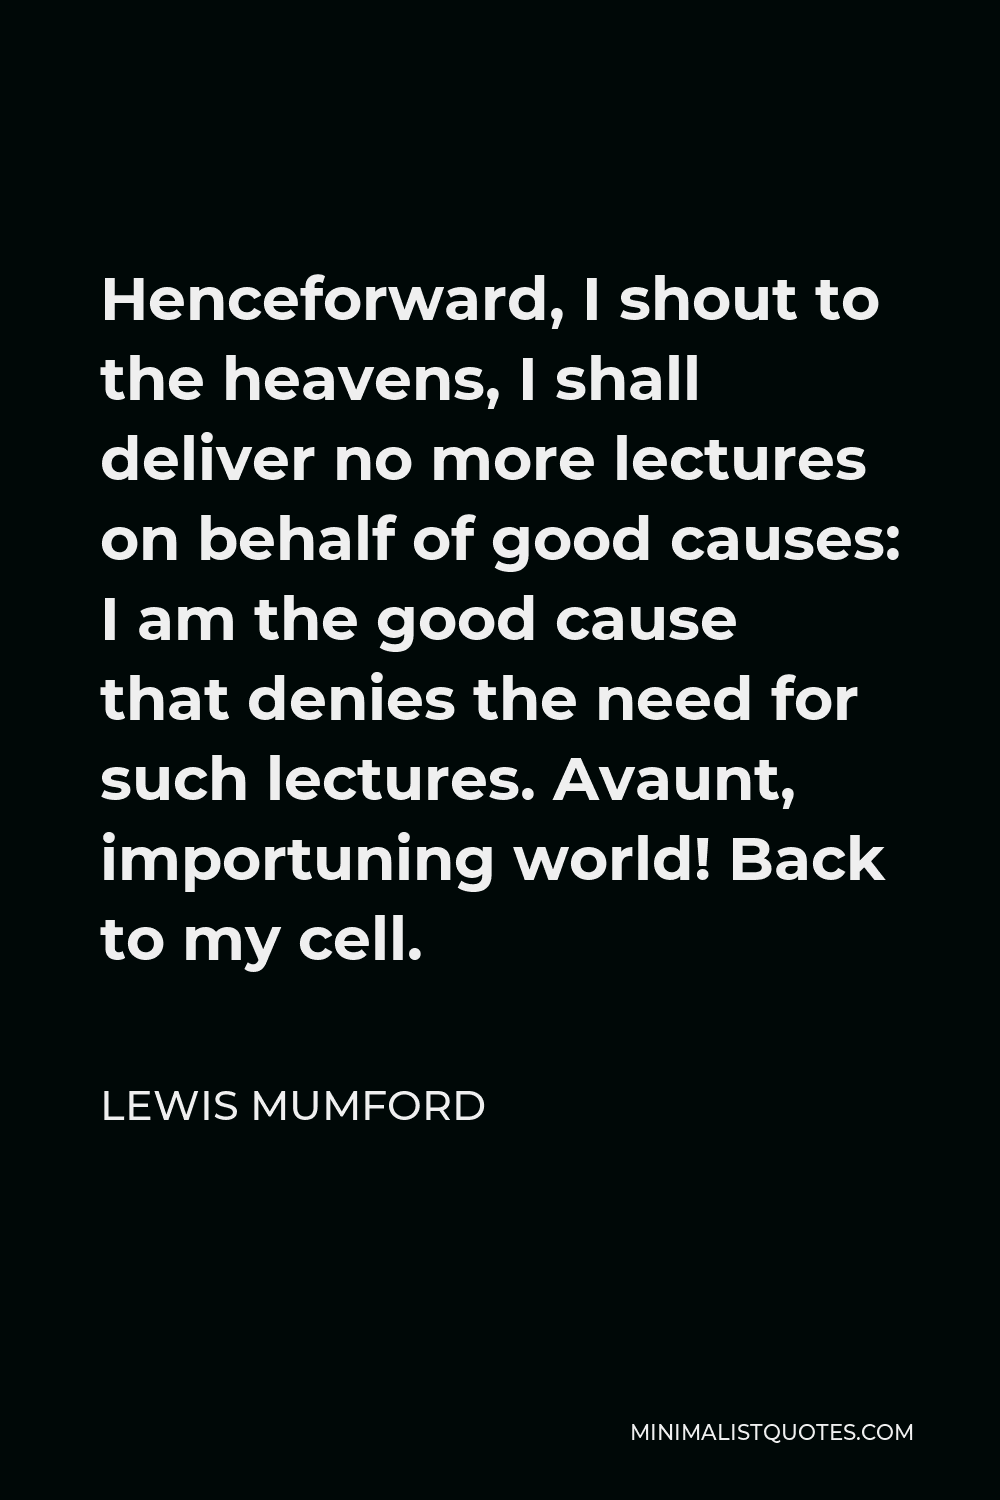 Lewis Mumford Quote - Henceforward, I shout to the heavens, I shall deliver no more lectures on behalf of good causes: I am the good cause that denies the need for such lectures. Avaunt, importuning world! Back to my cell.